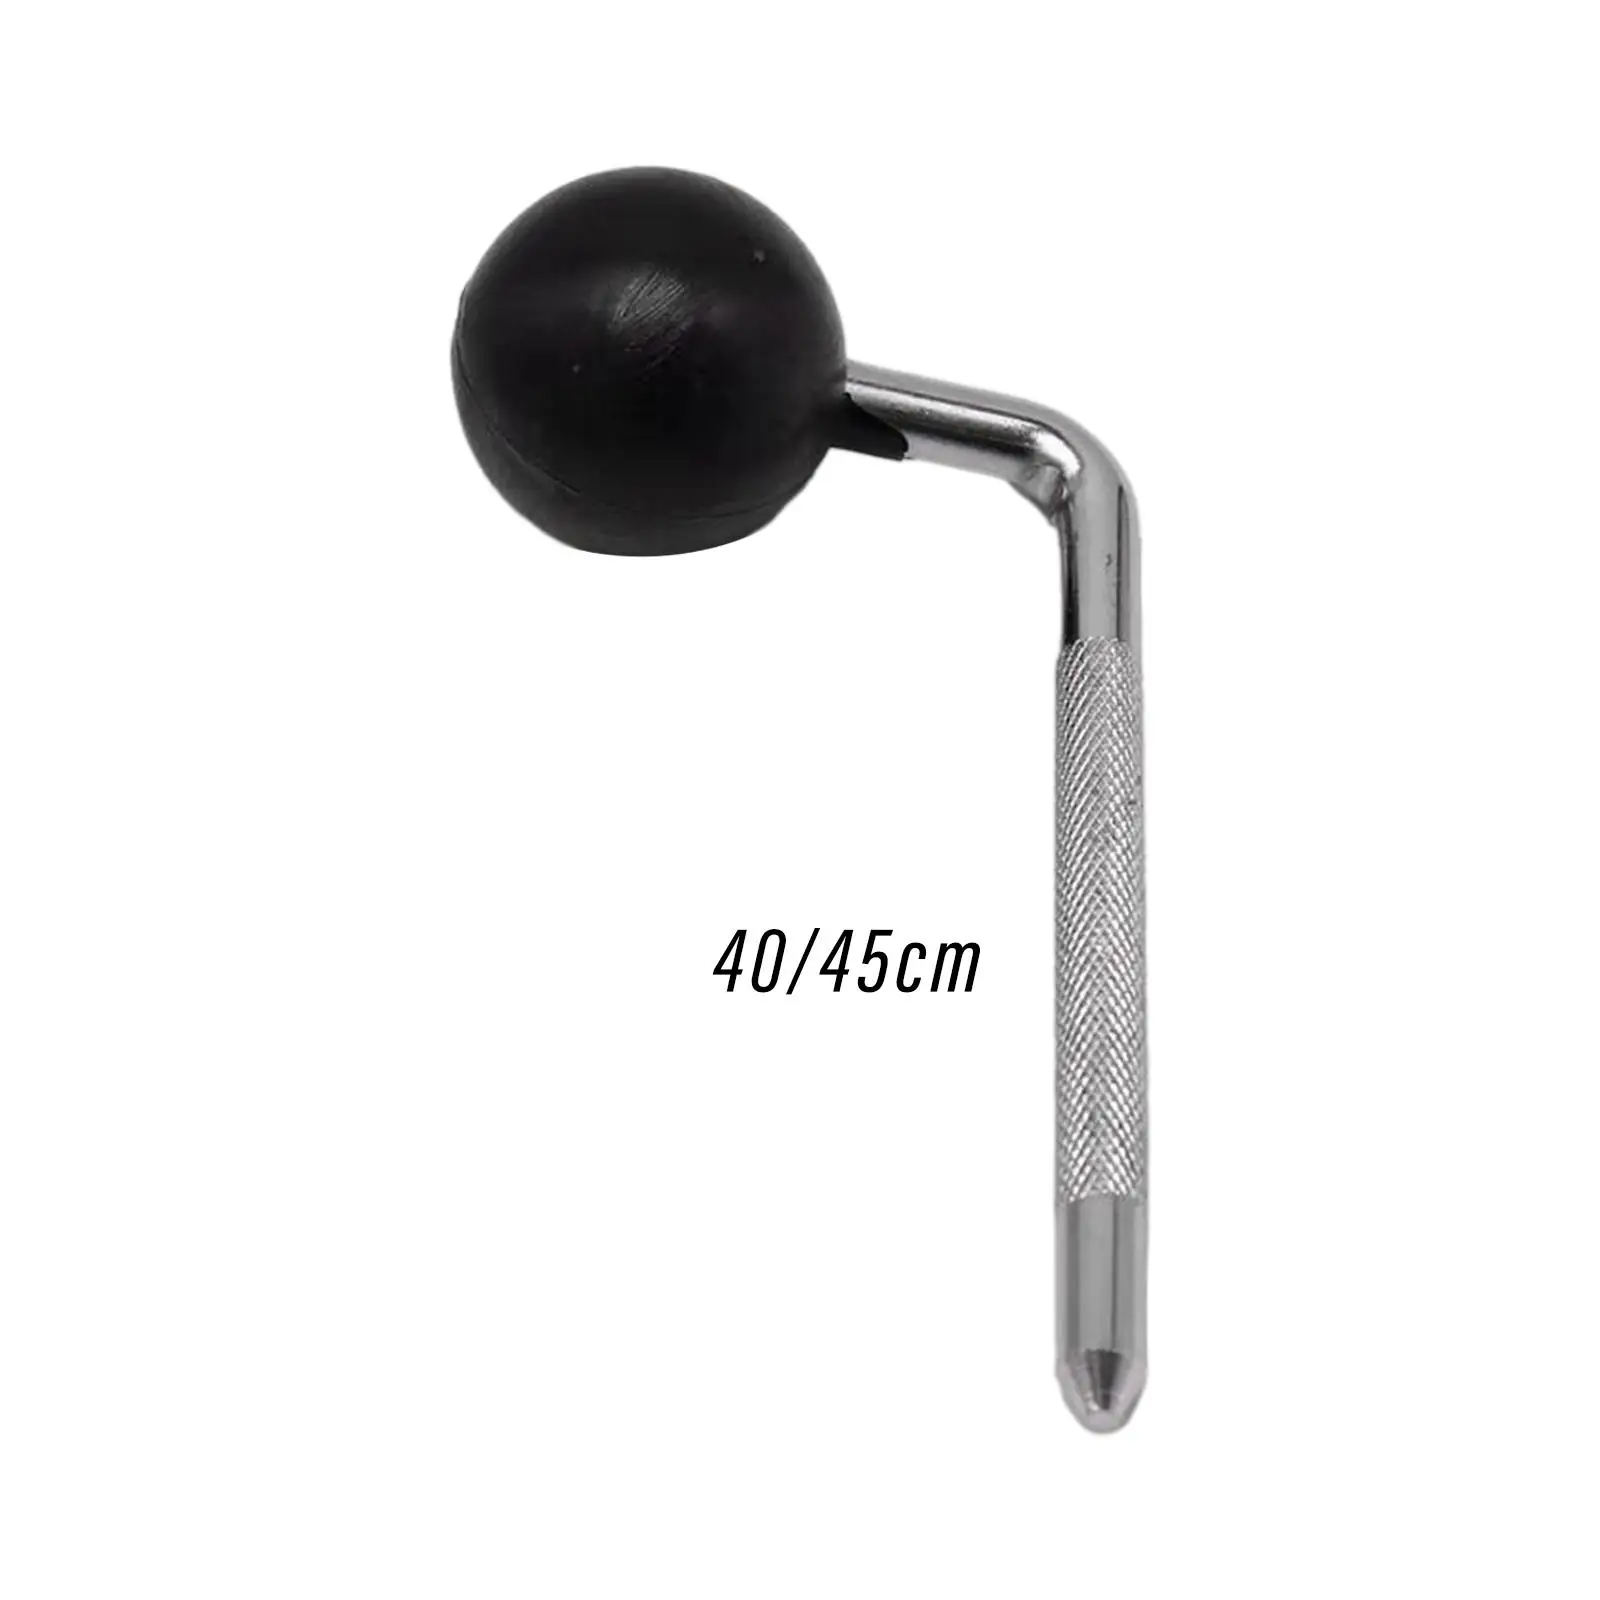 L Rod Ball Handbell Cowbell Clamp Holder Drum Stand Holder for Drum Player Universal Ball